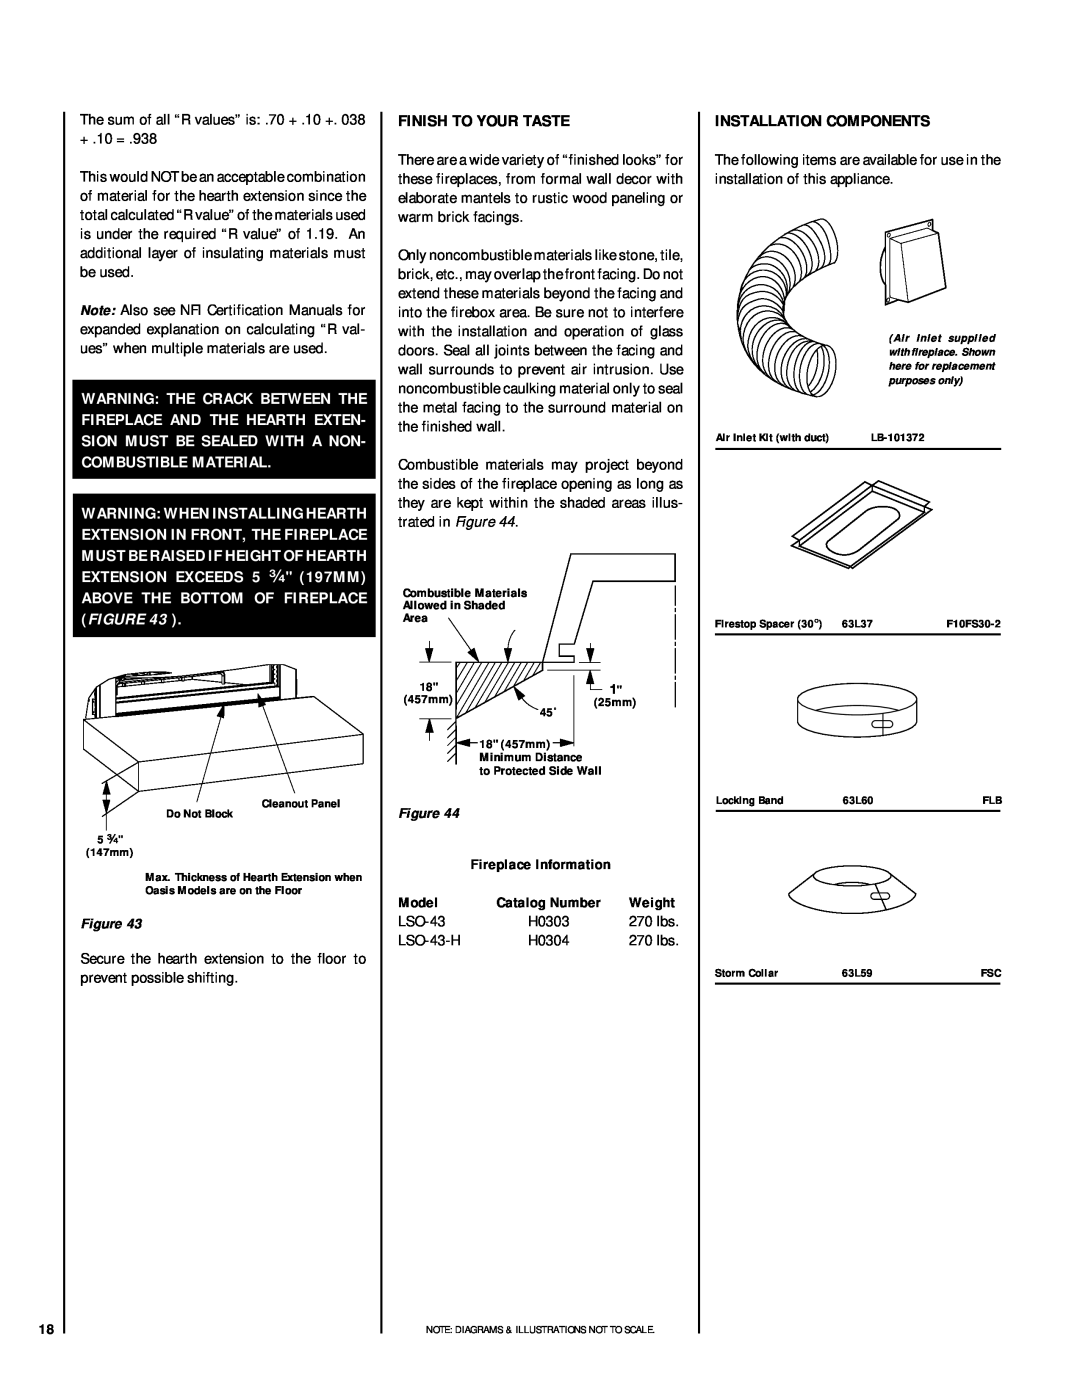 Lennox Hearth installation instructions Finish To Your Taste, Installation Components, Catalog Number, LSO-43-H, Model 